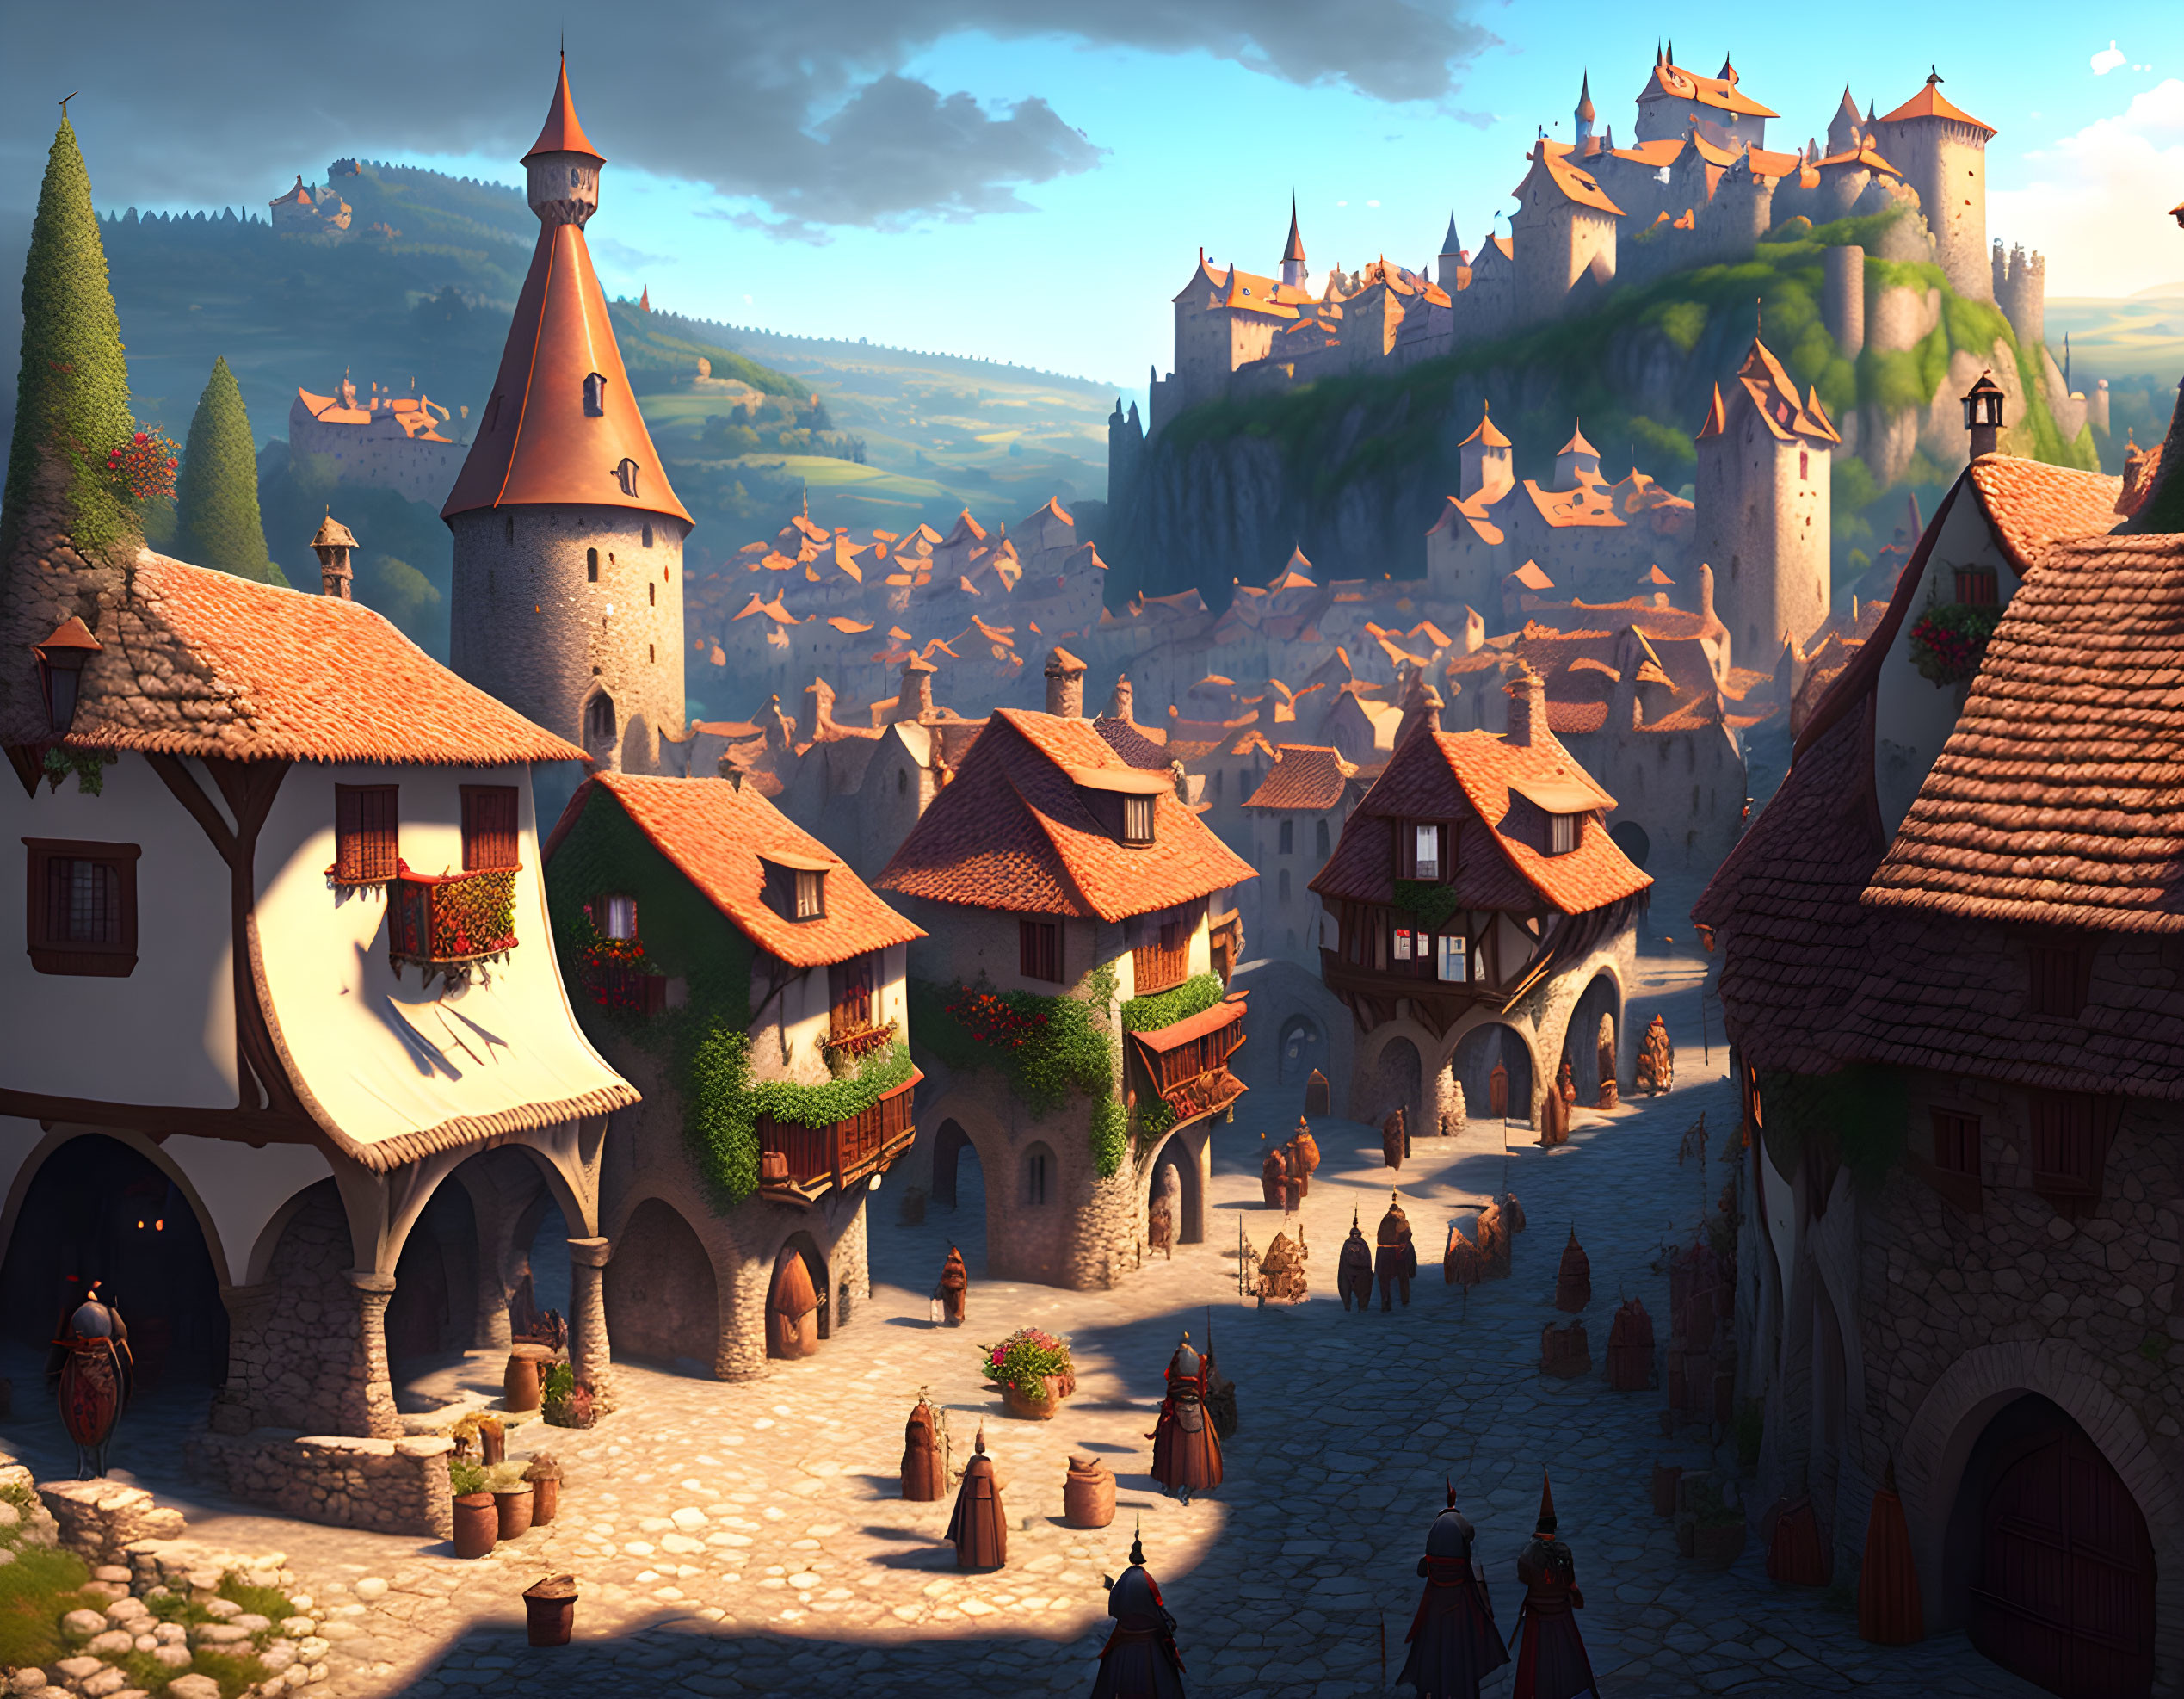 Medieval village with cobblestone streets and castle on hill